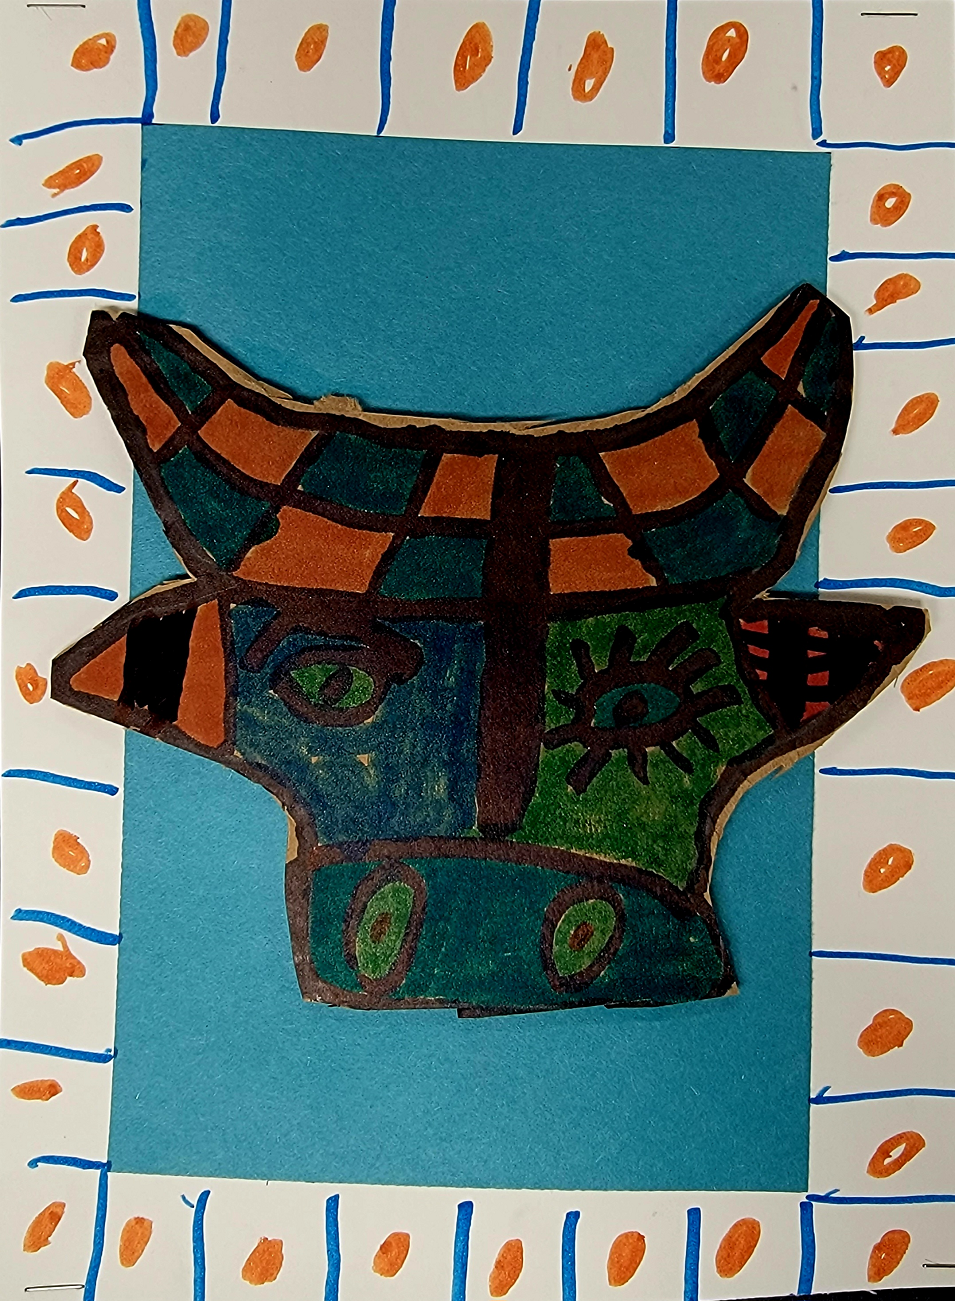 Cardboard Bulls inspired by Pablo Picasso